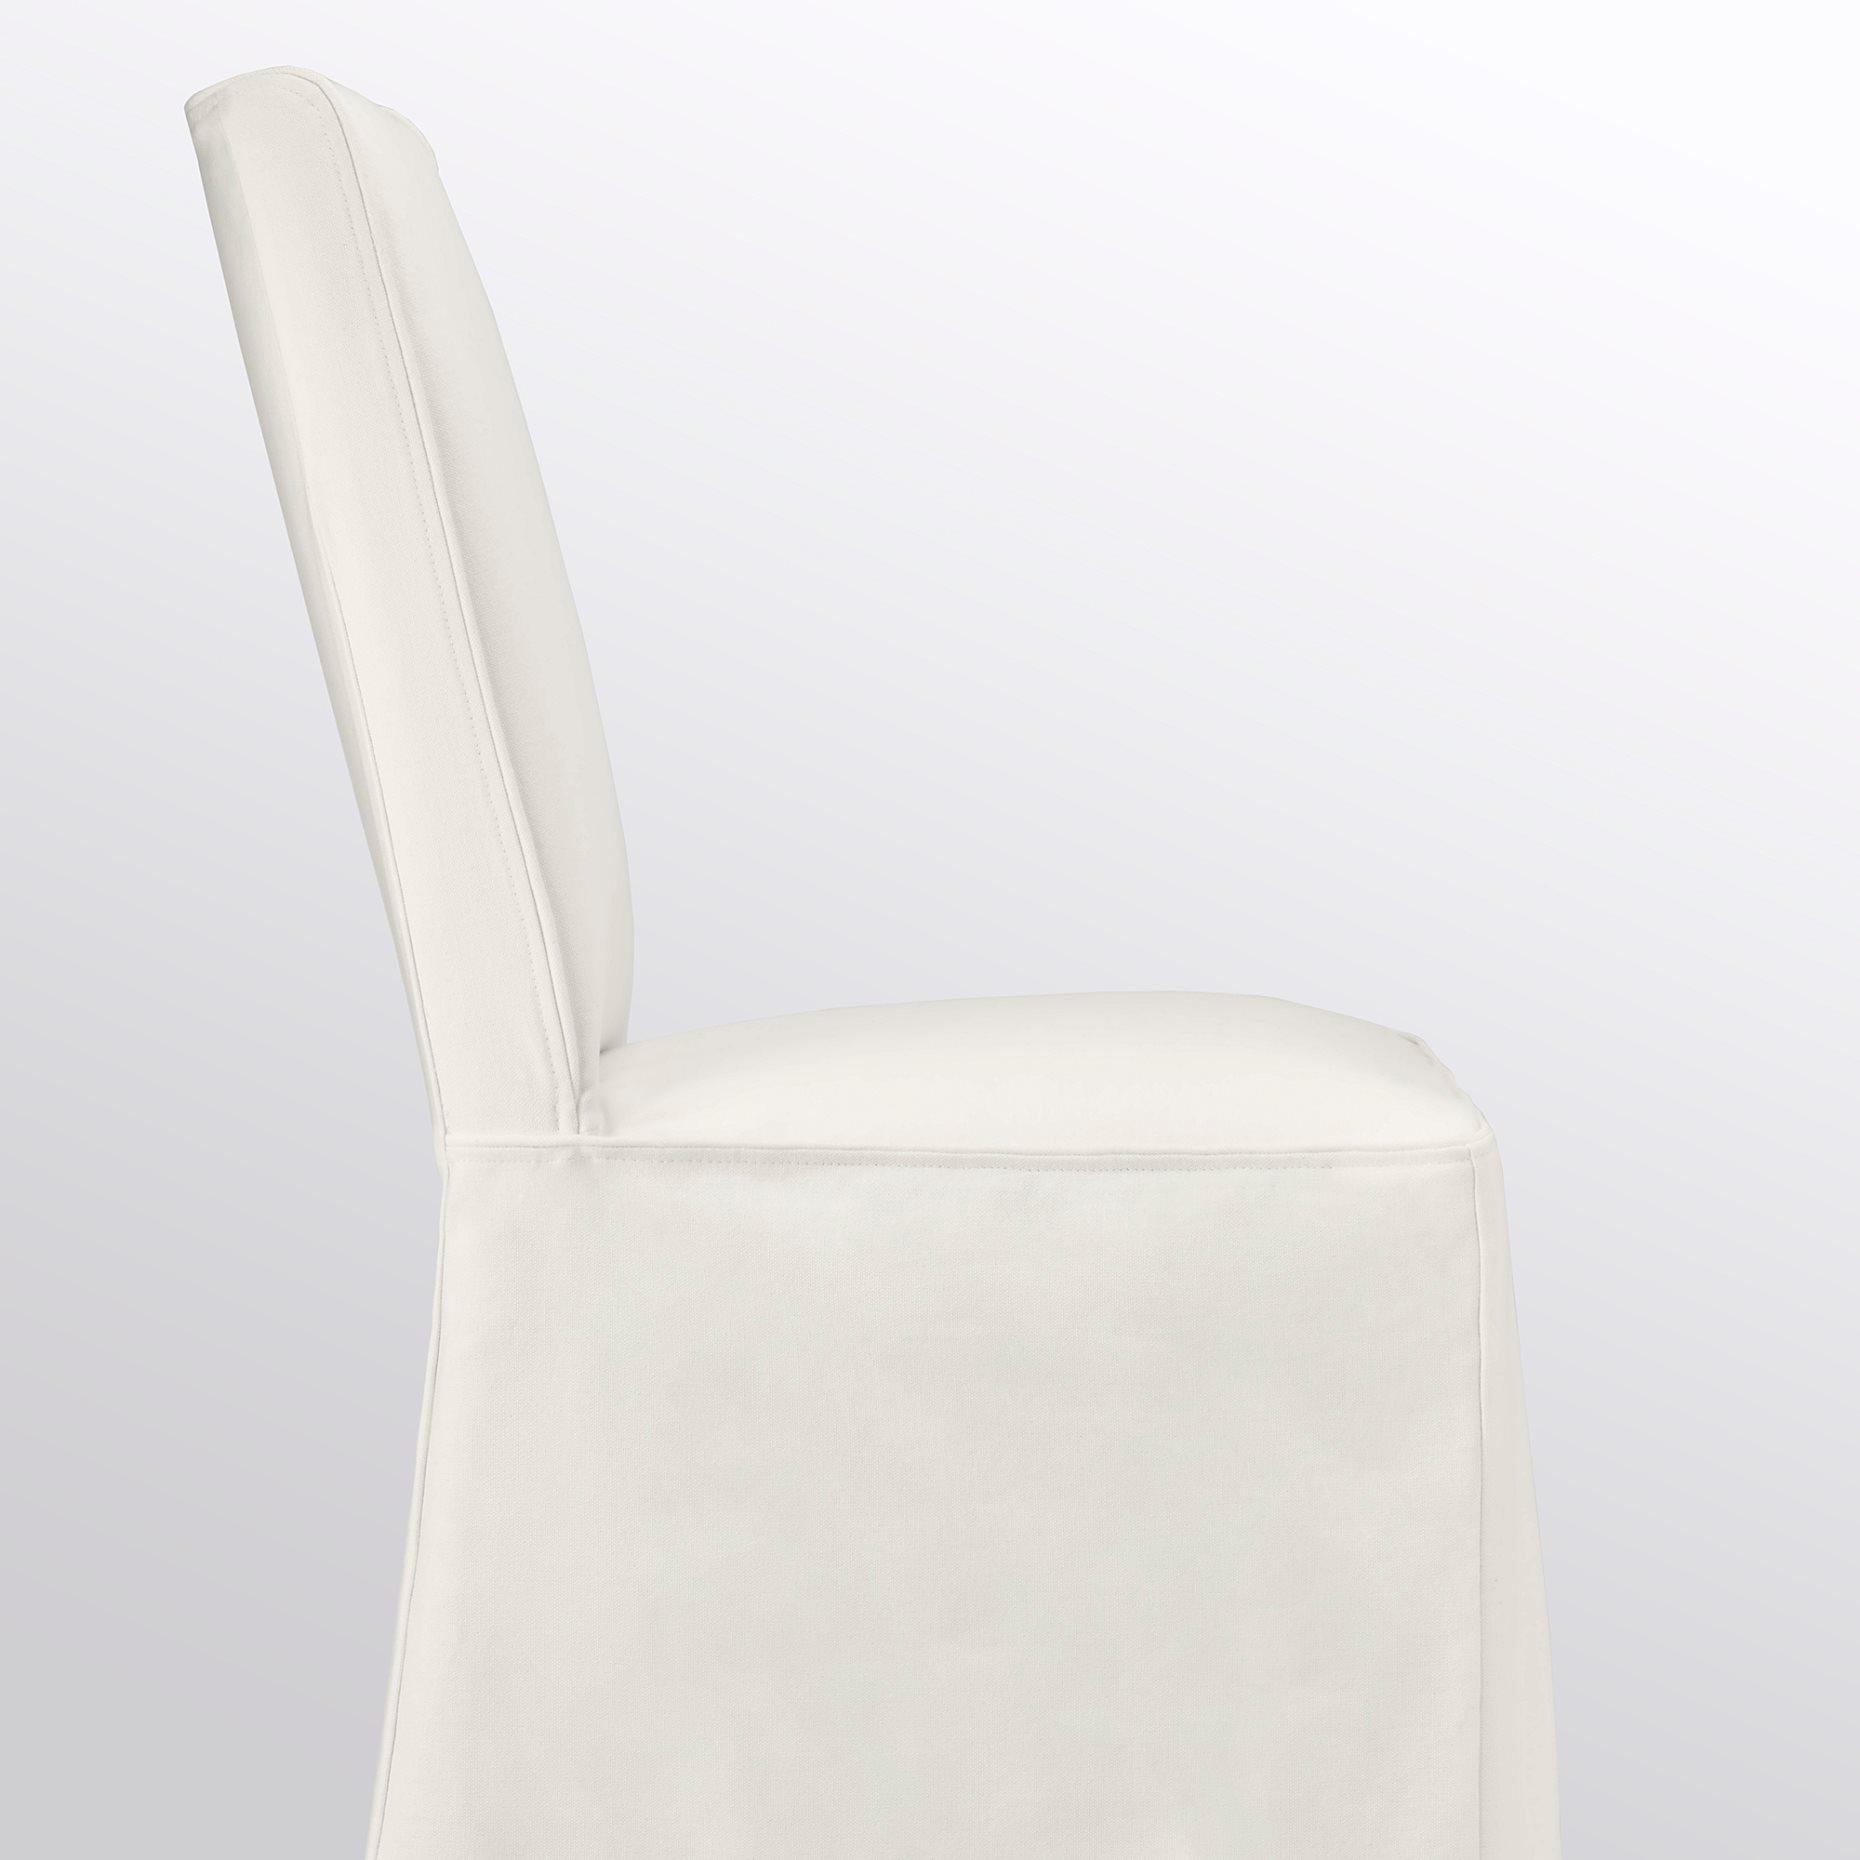 BERGMUND, chair with long cover, 793.859.43